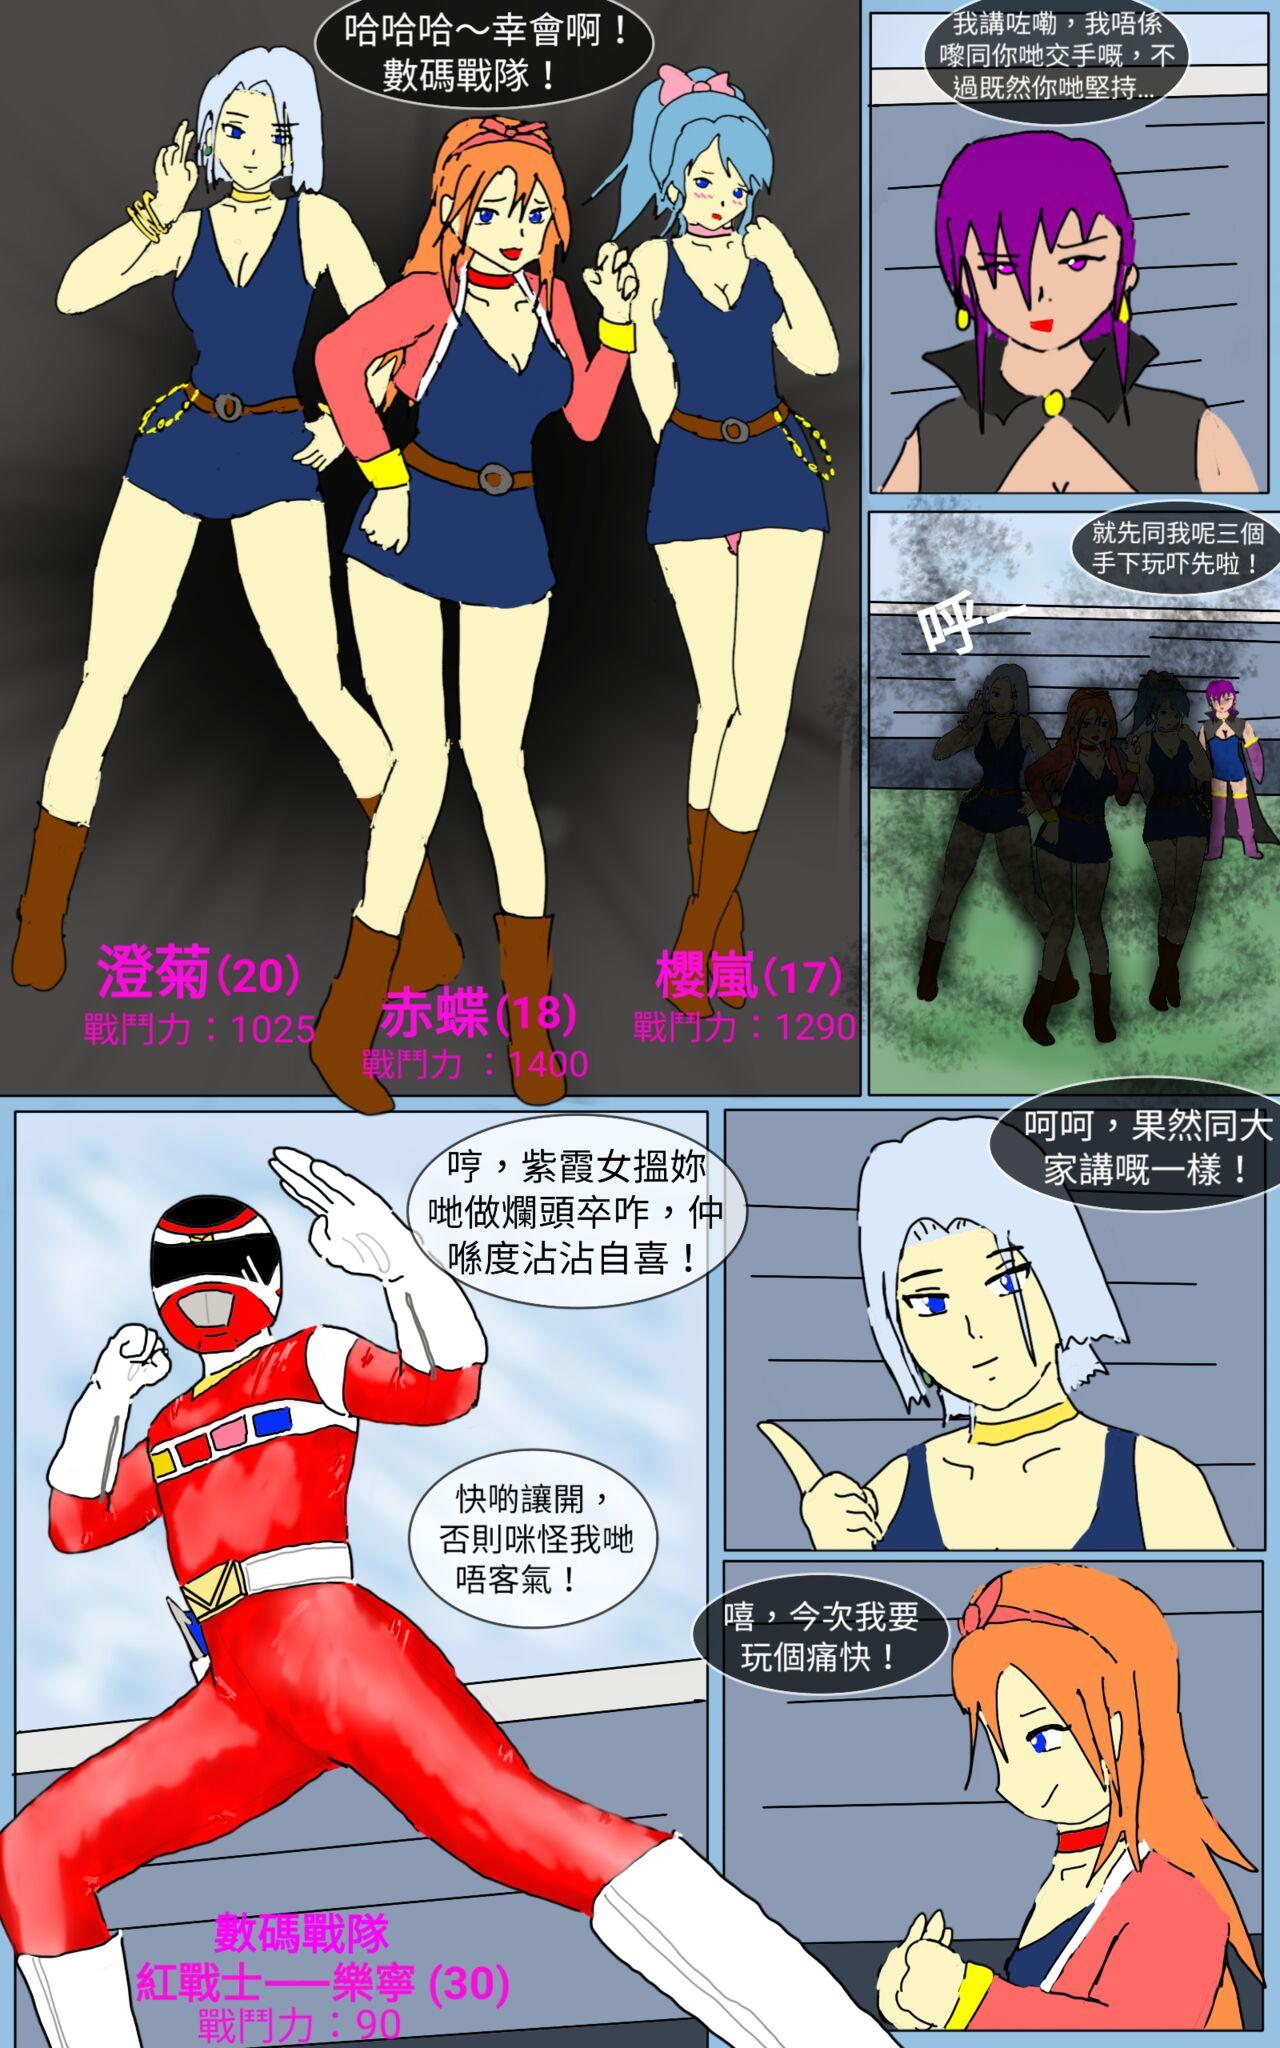 Girl Mission 13 - Super sentai Picked Up - Page 3